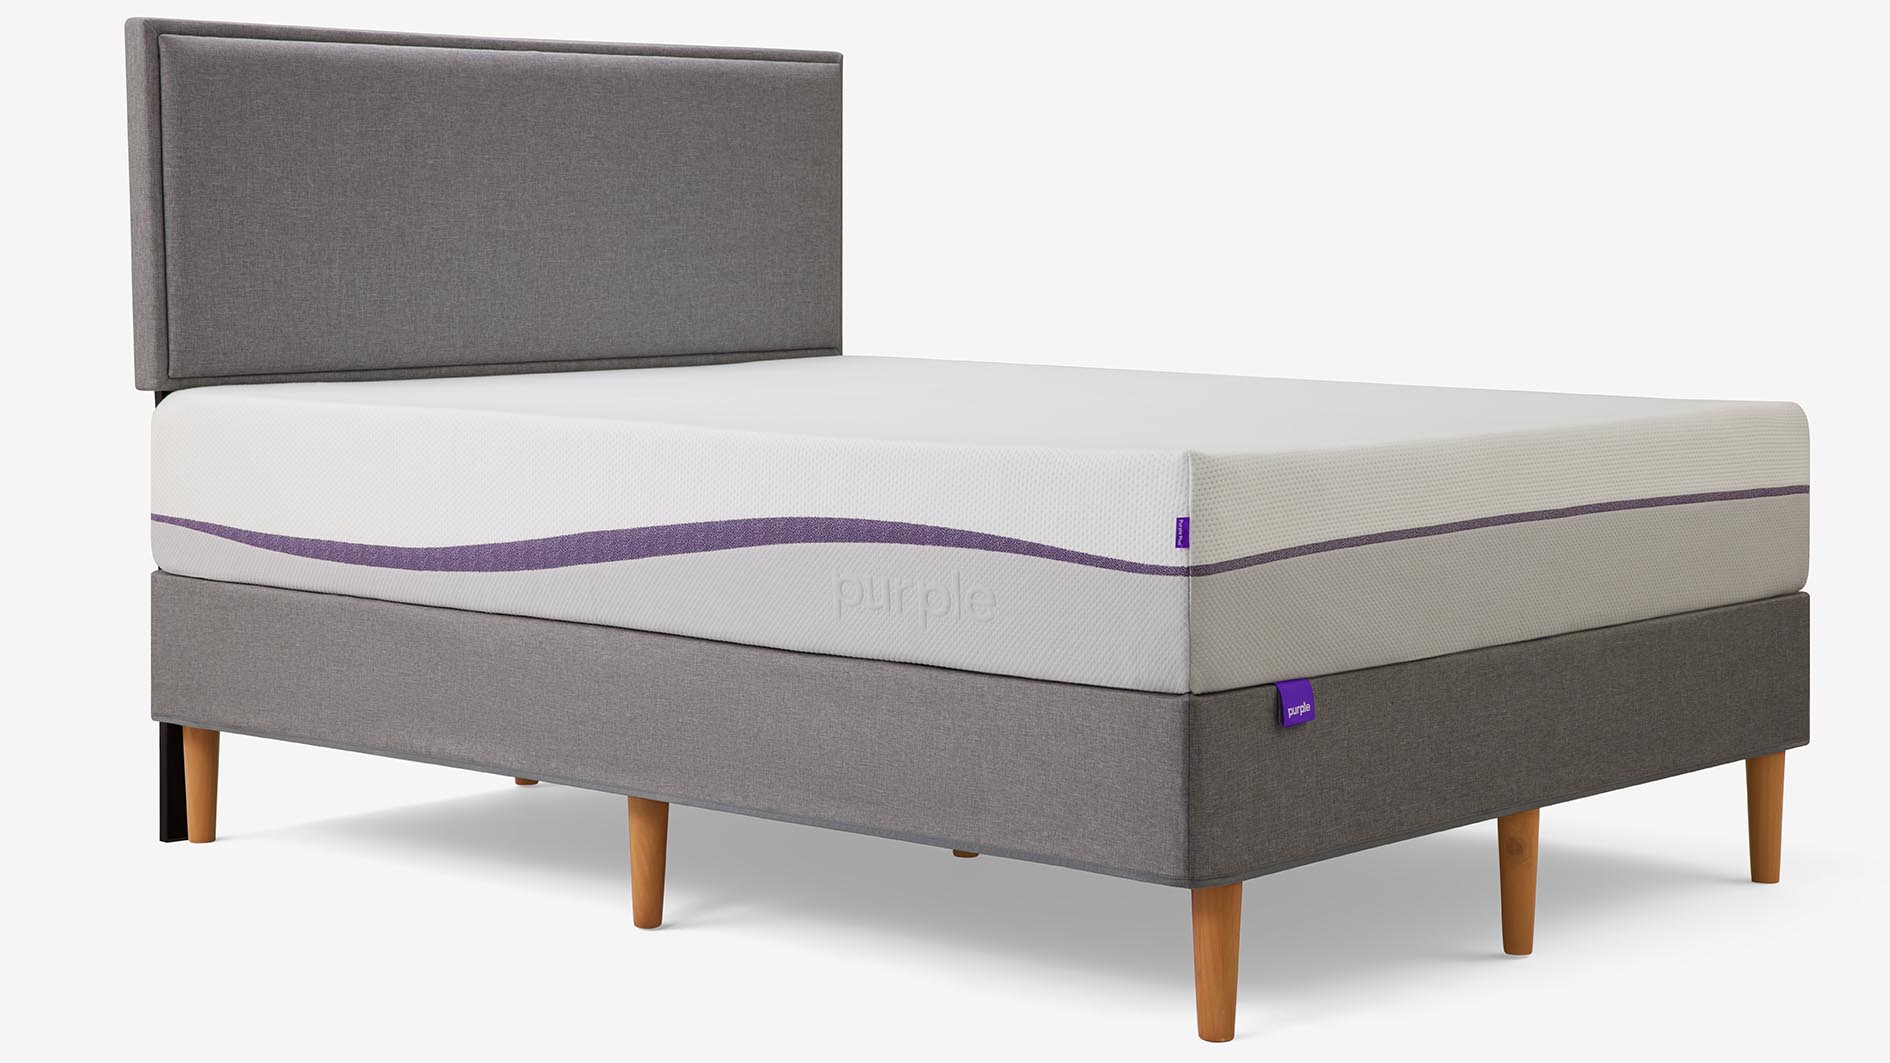 difference between purple and purple plus mattress